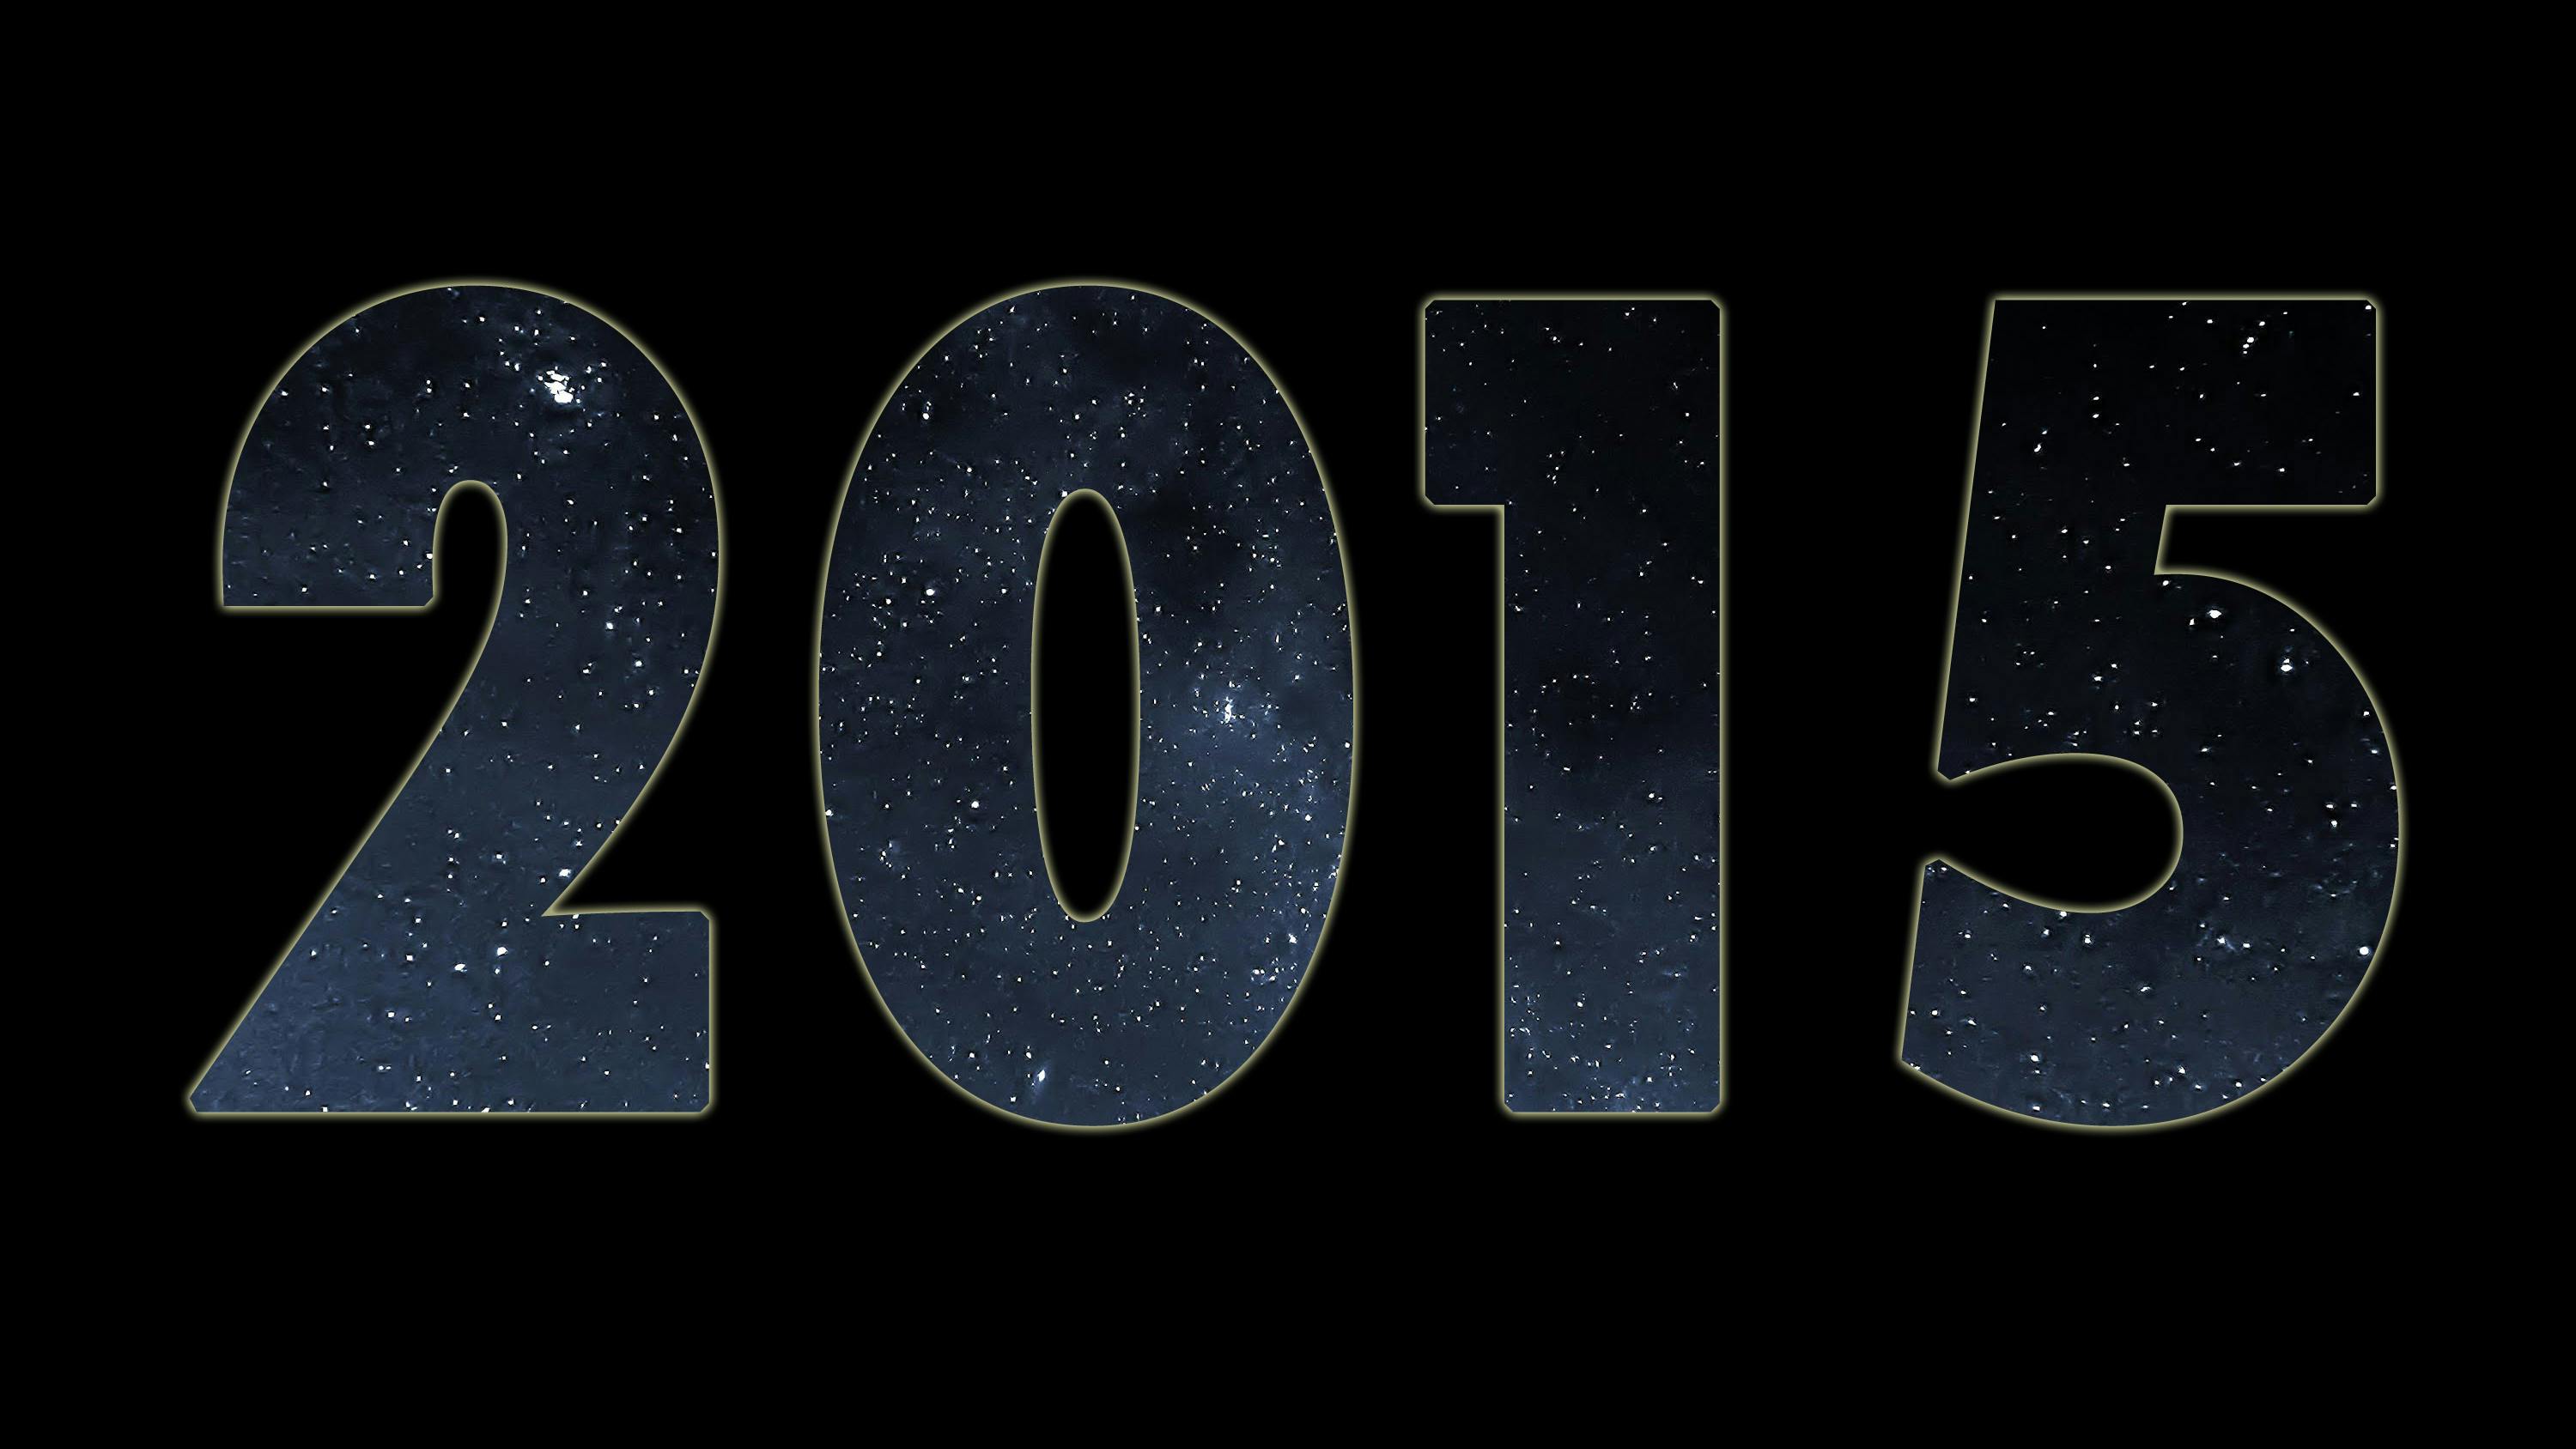 Alfredo’s Top 5 Physics & Astrophysics Stories Of 2015